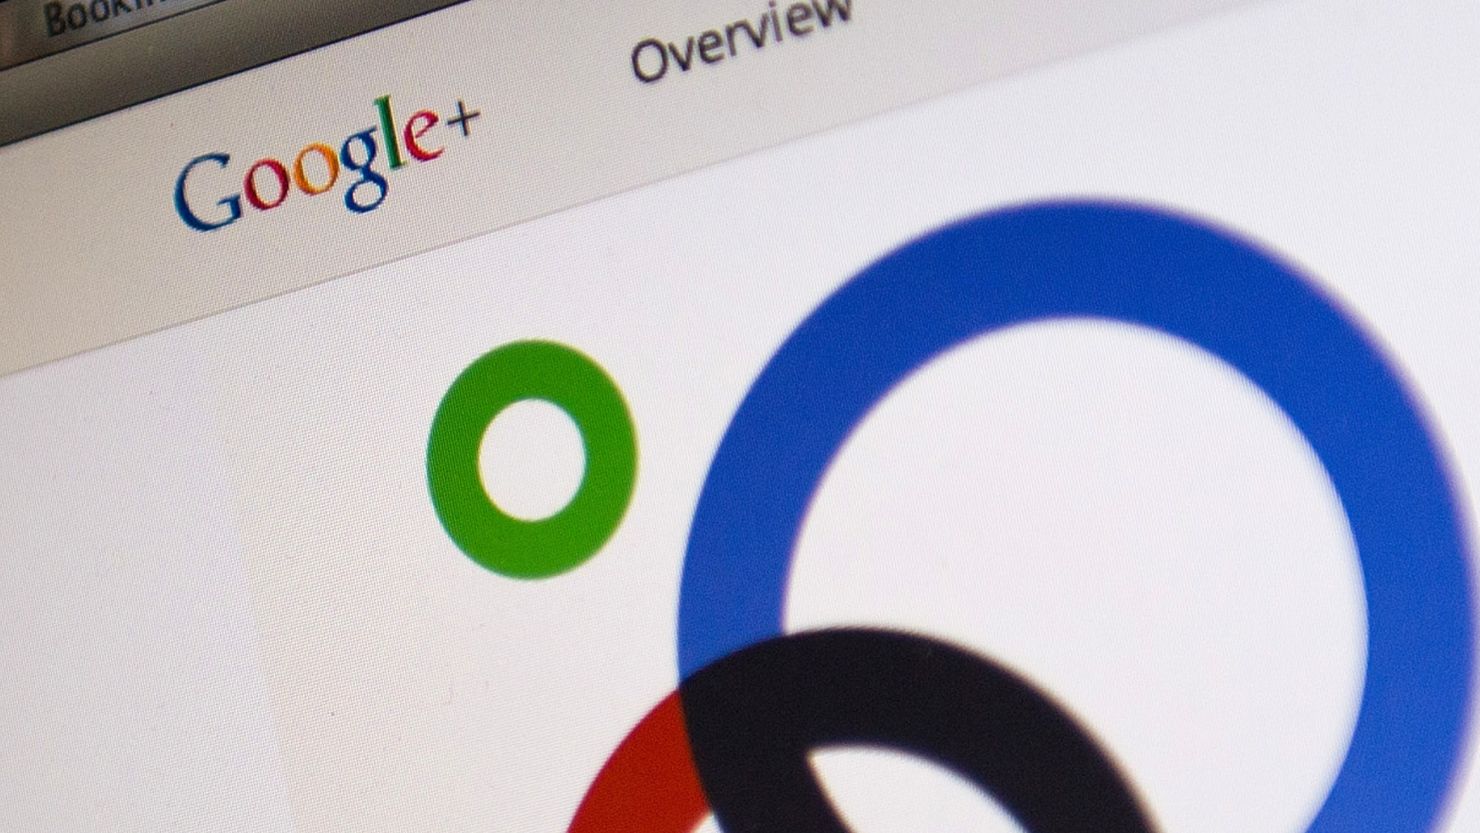 By this time next year Google+ will have close to 300 million users, according to one estimate.